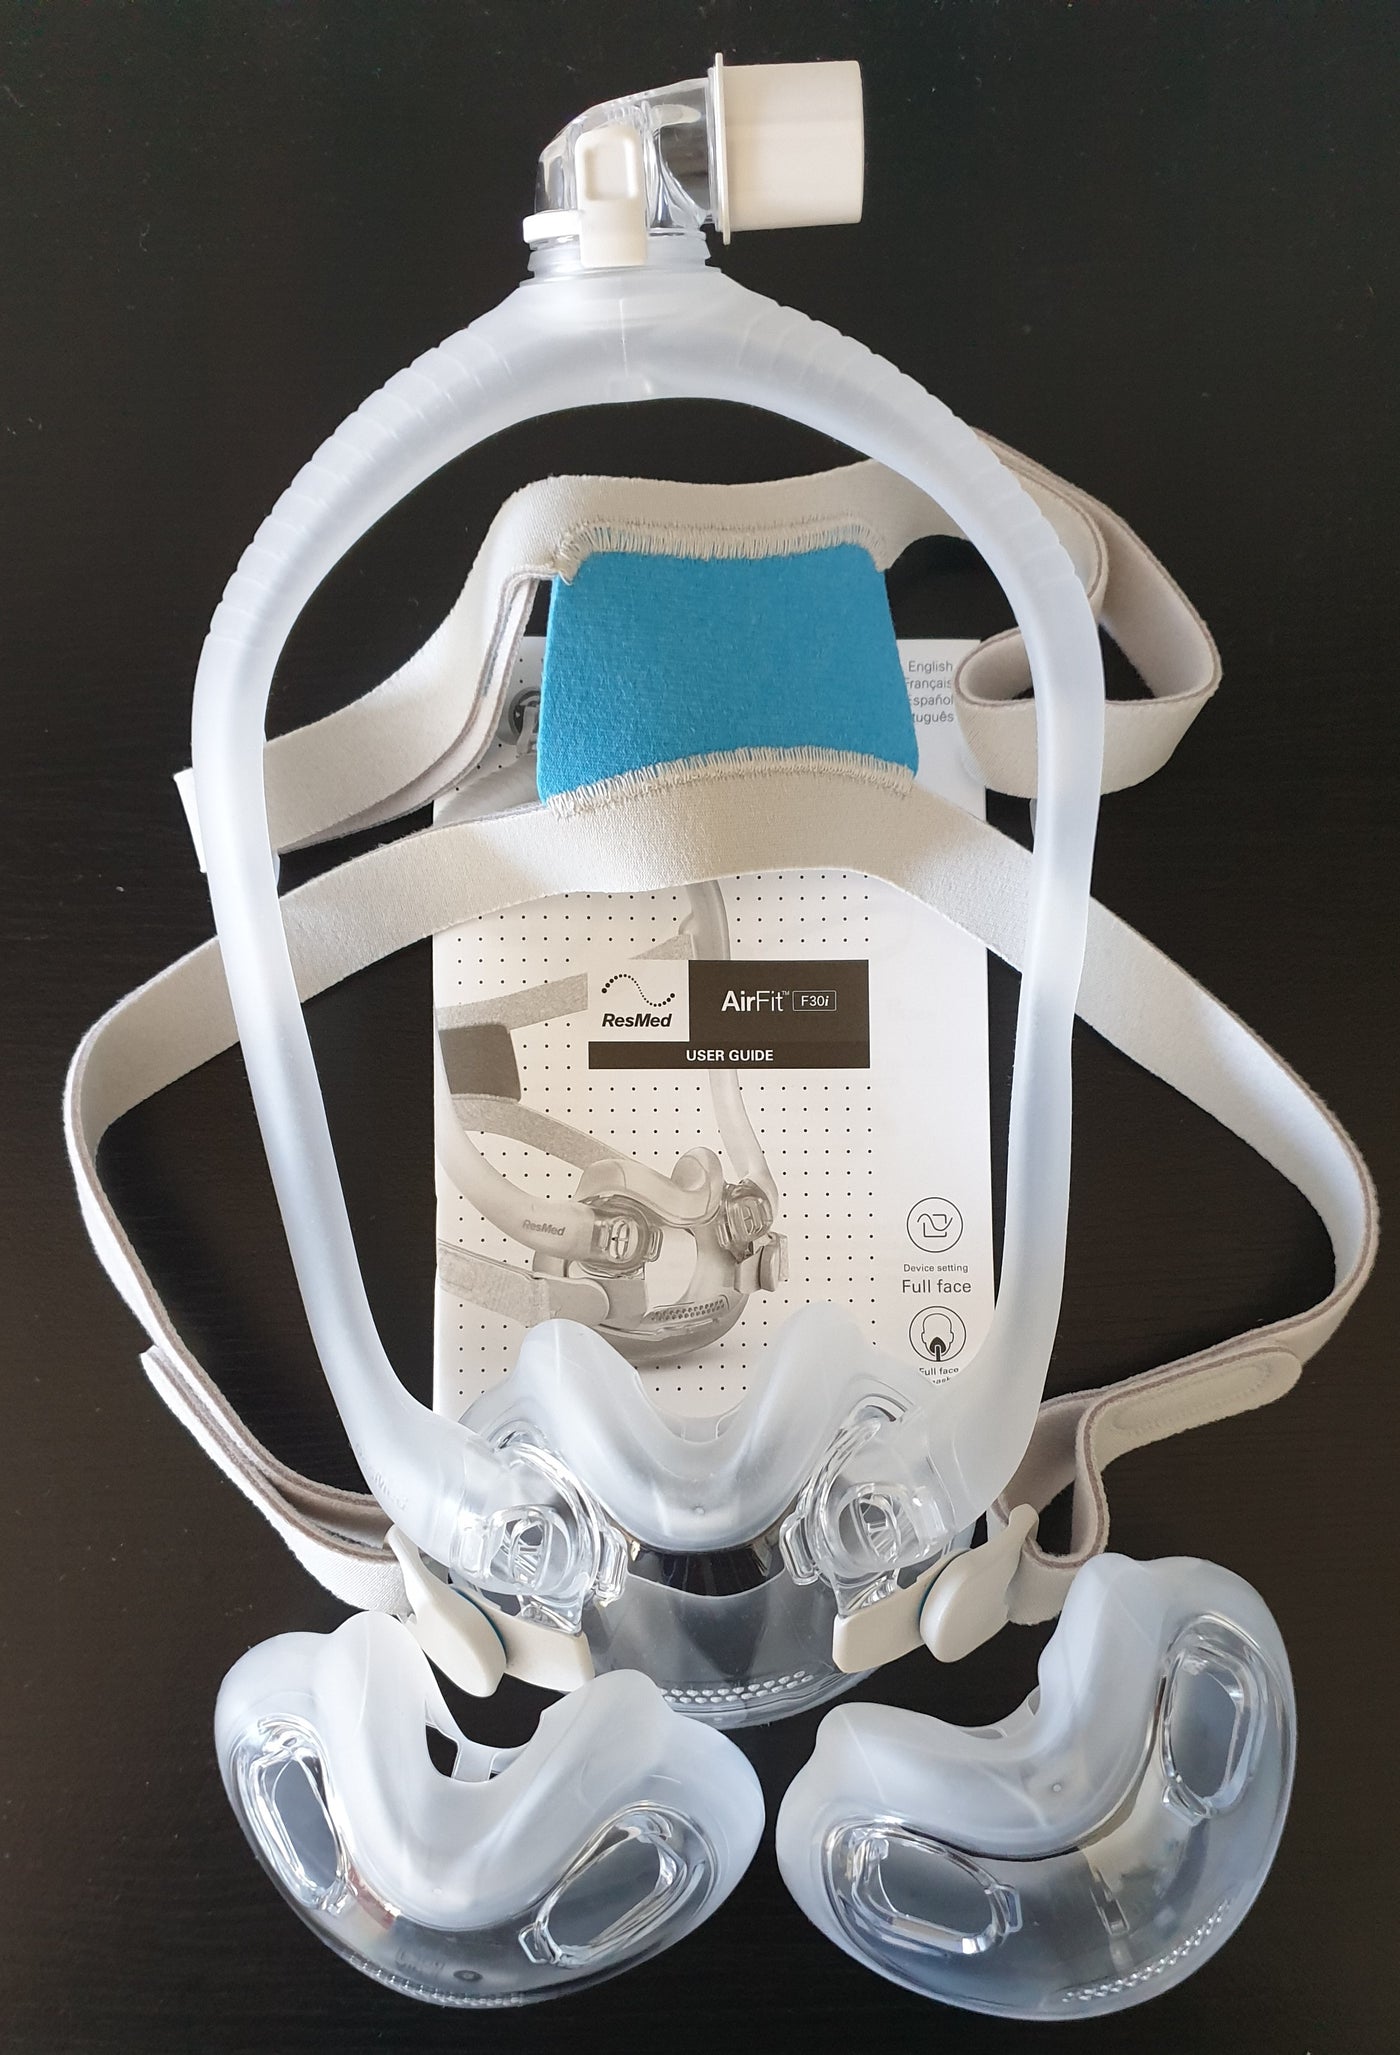 ResMed AirFit F30i Fullface mask all cushion or single cushion Pack with headgear CPAP